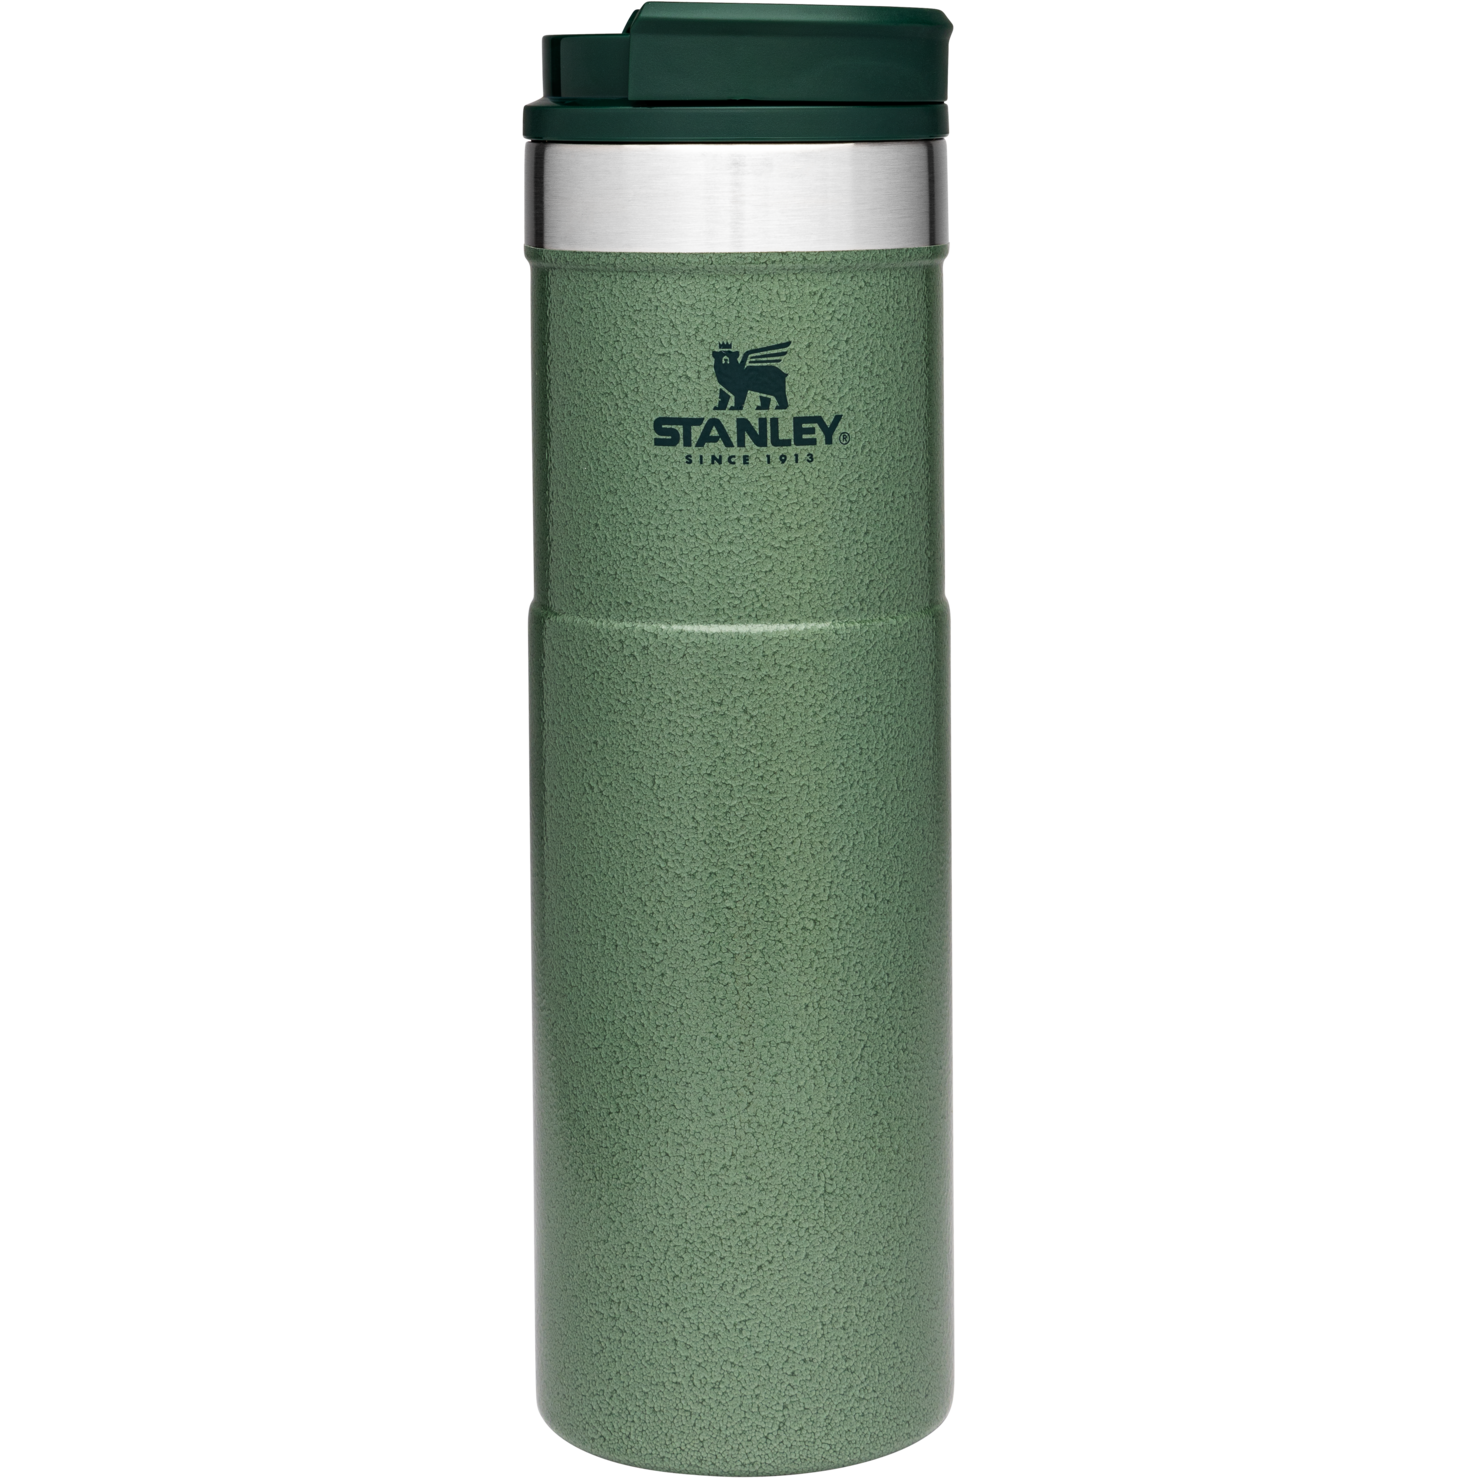 Traveler 20oz - Black  Vacuum Insulated Stainless Steel by Welly